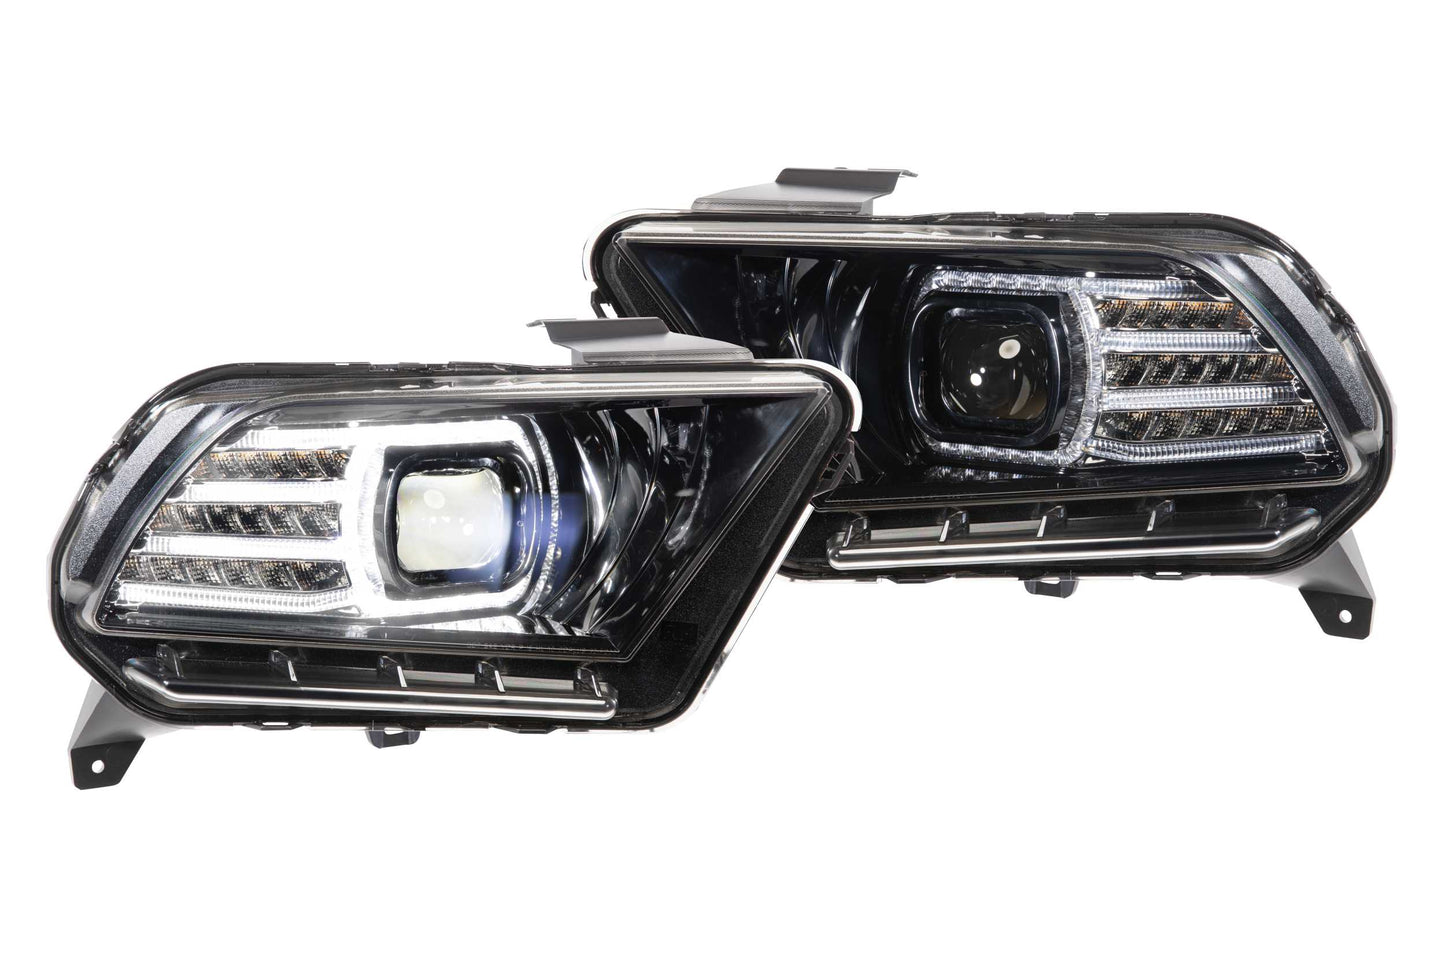 Morimoto XB LED Projector Headlights: Ford Mustang 2013-2014